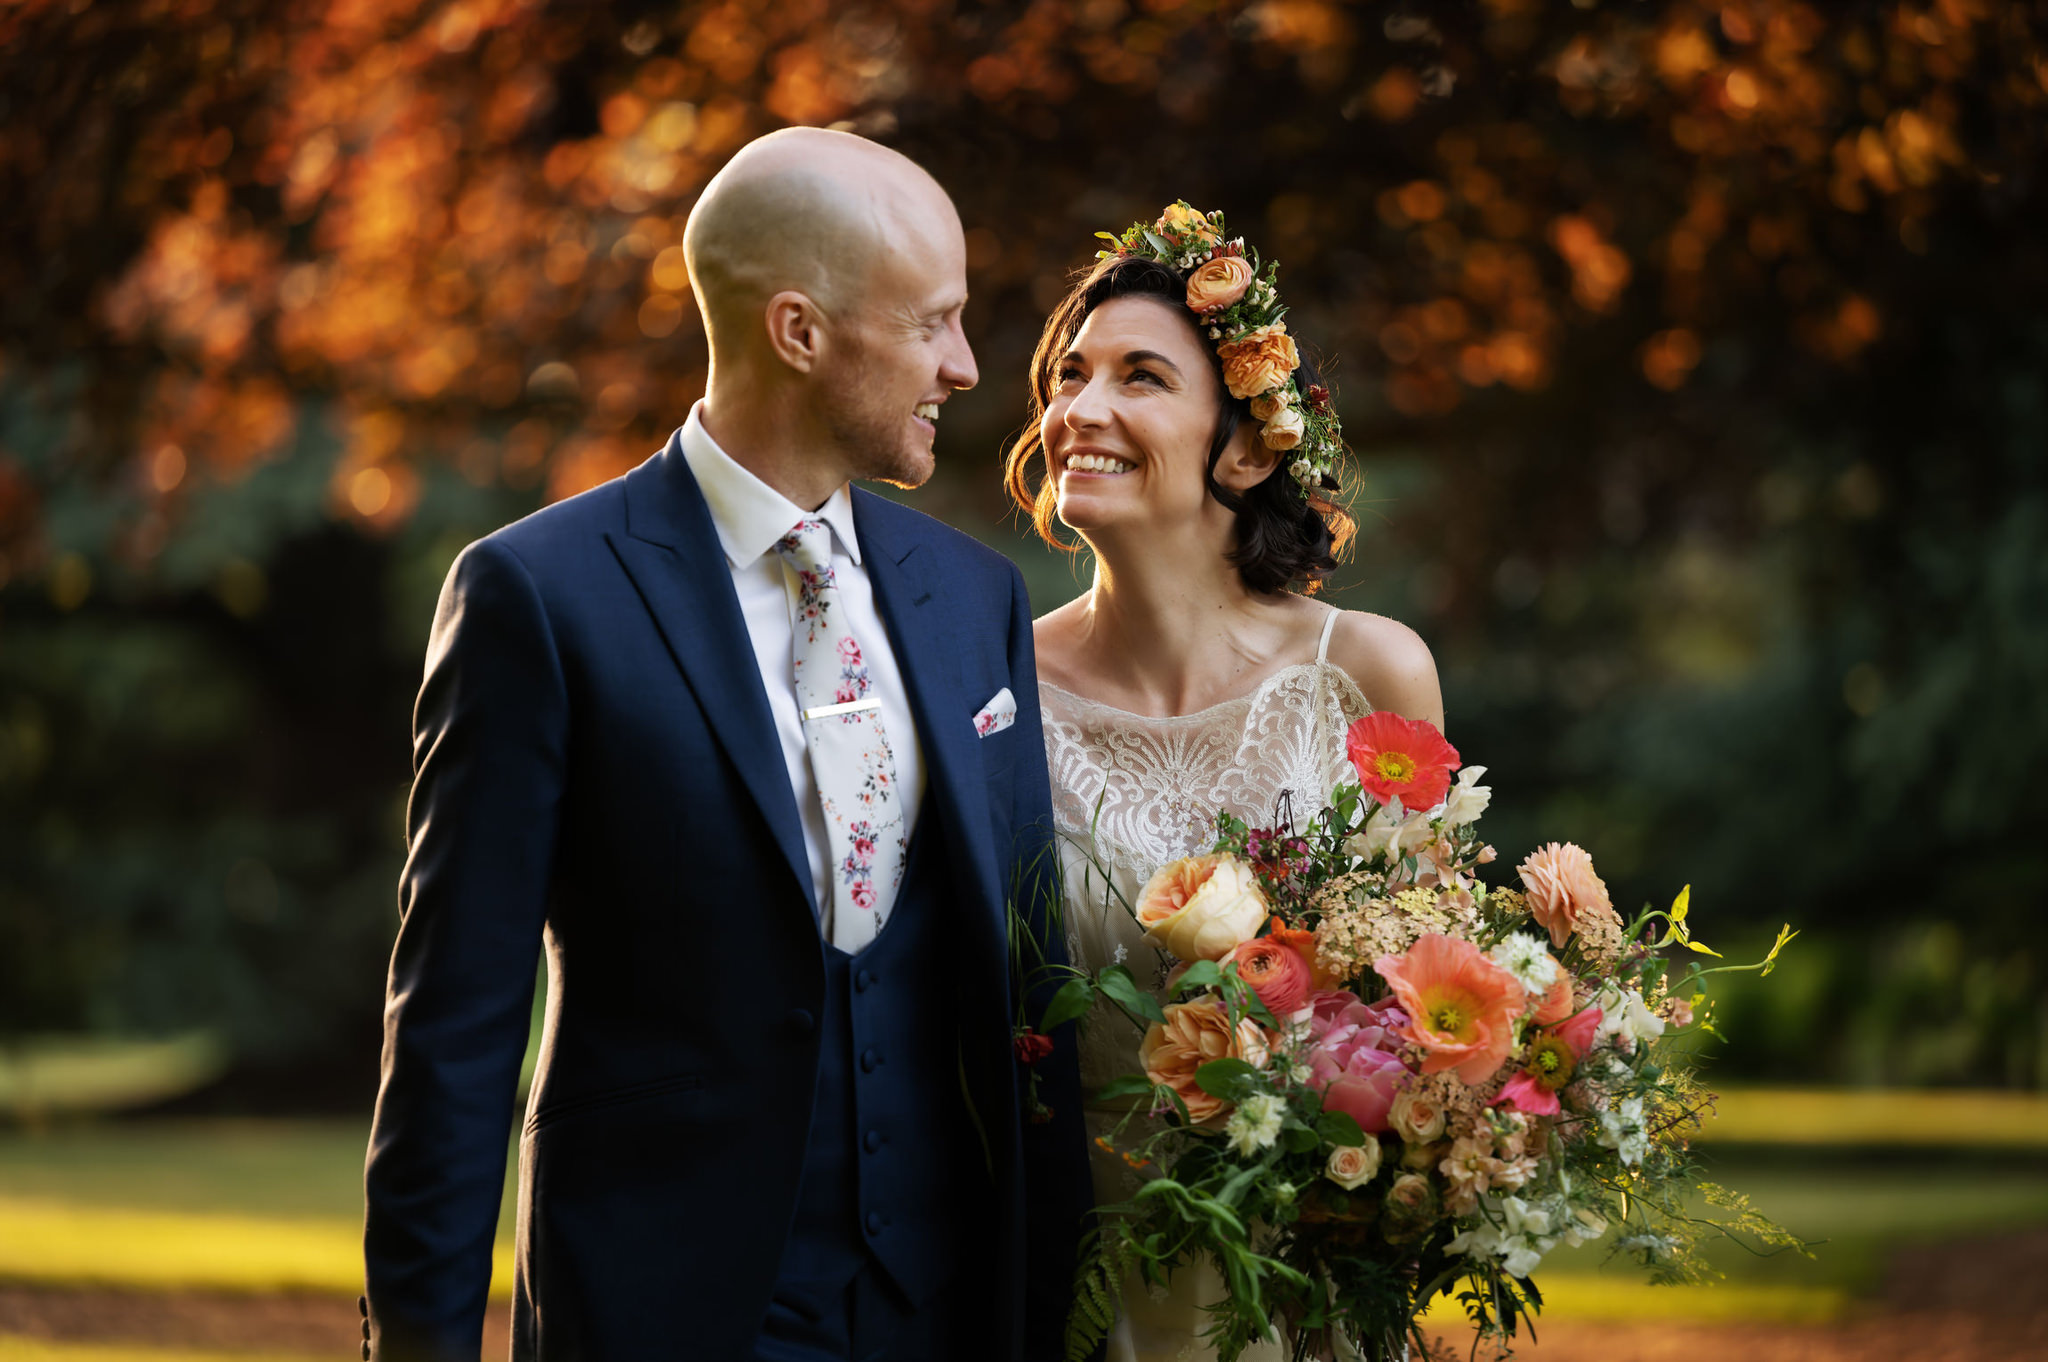 Buckinghamshire wedding photographer Andy Sidders. A couple look into each others eyes. She's holding an autumnal bouquet. He's wearing a smart suit. The light is golden and the background is a garden in autumn.